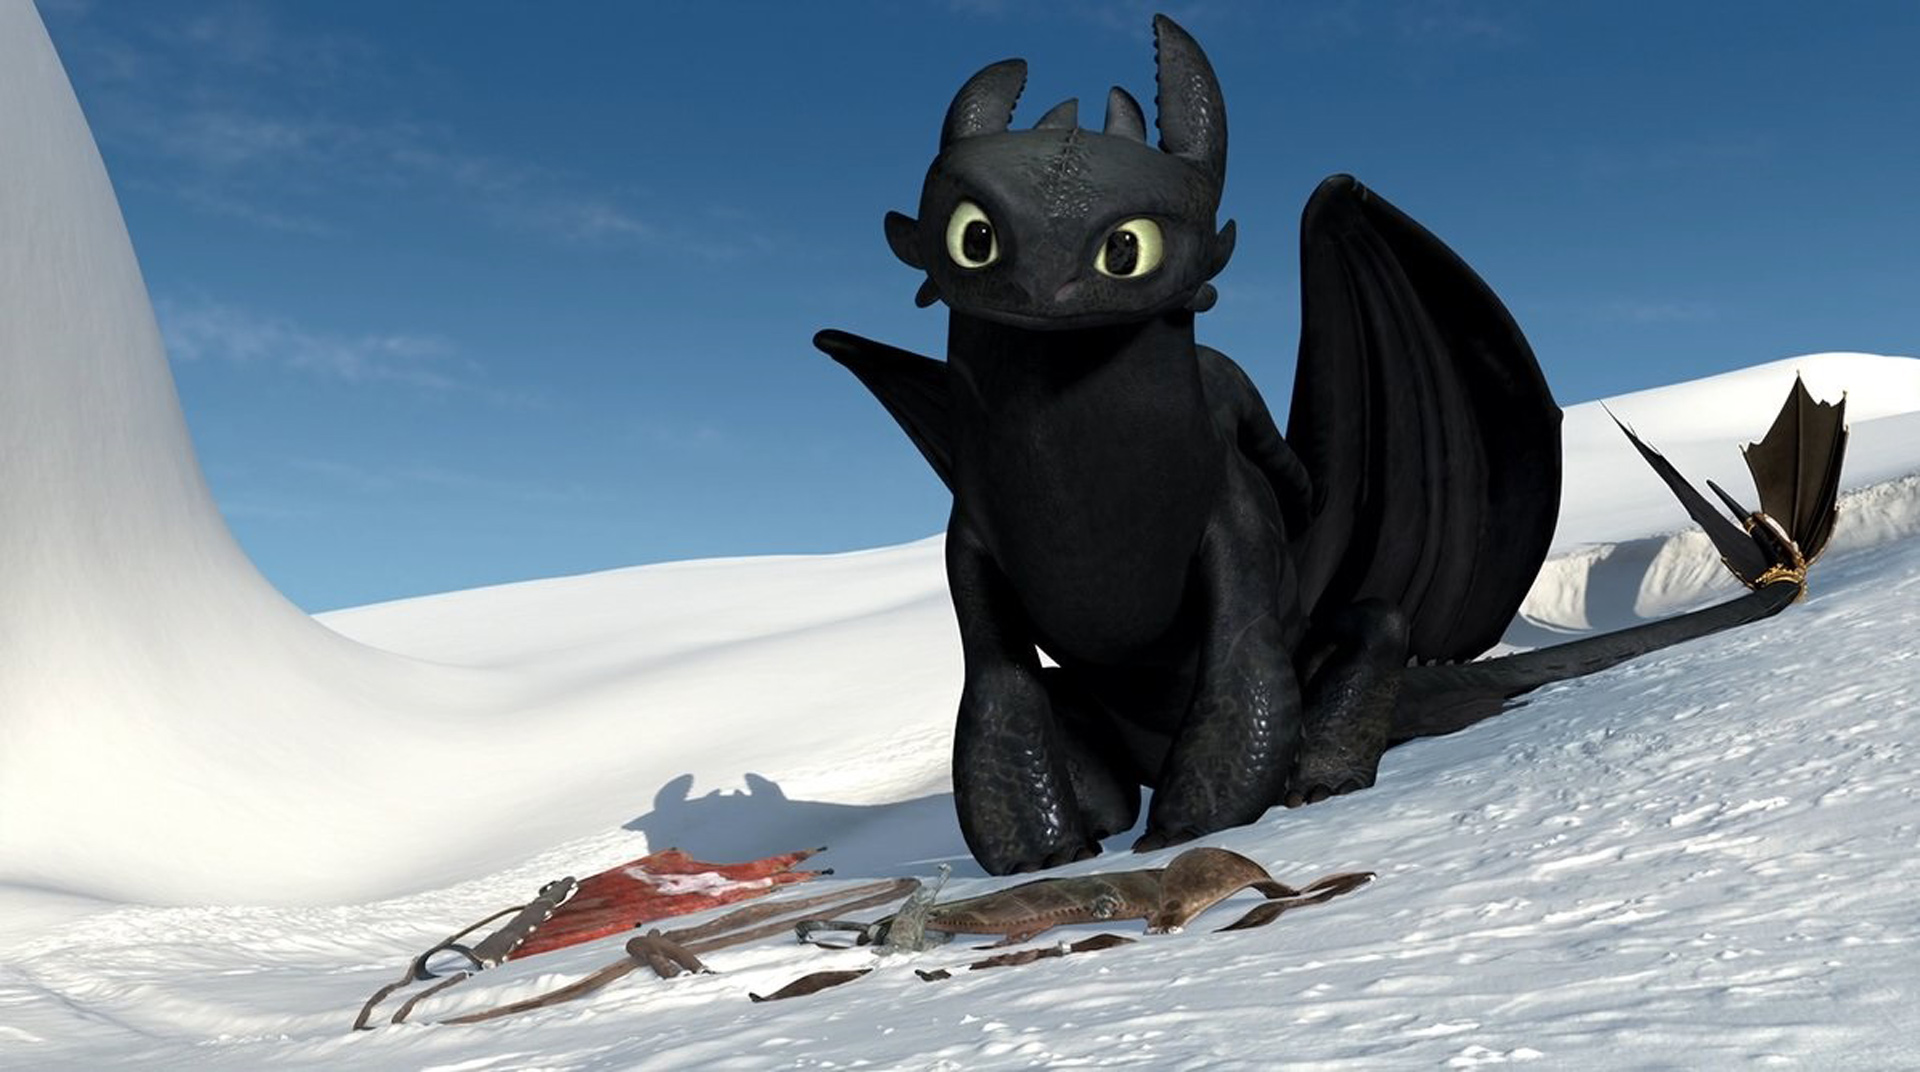 ho to train your dragon school of dragon super drop flight how to